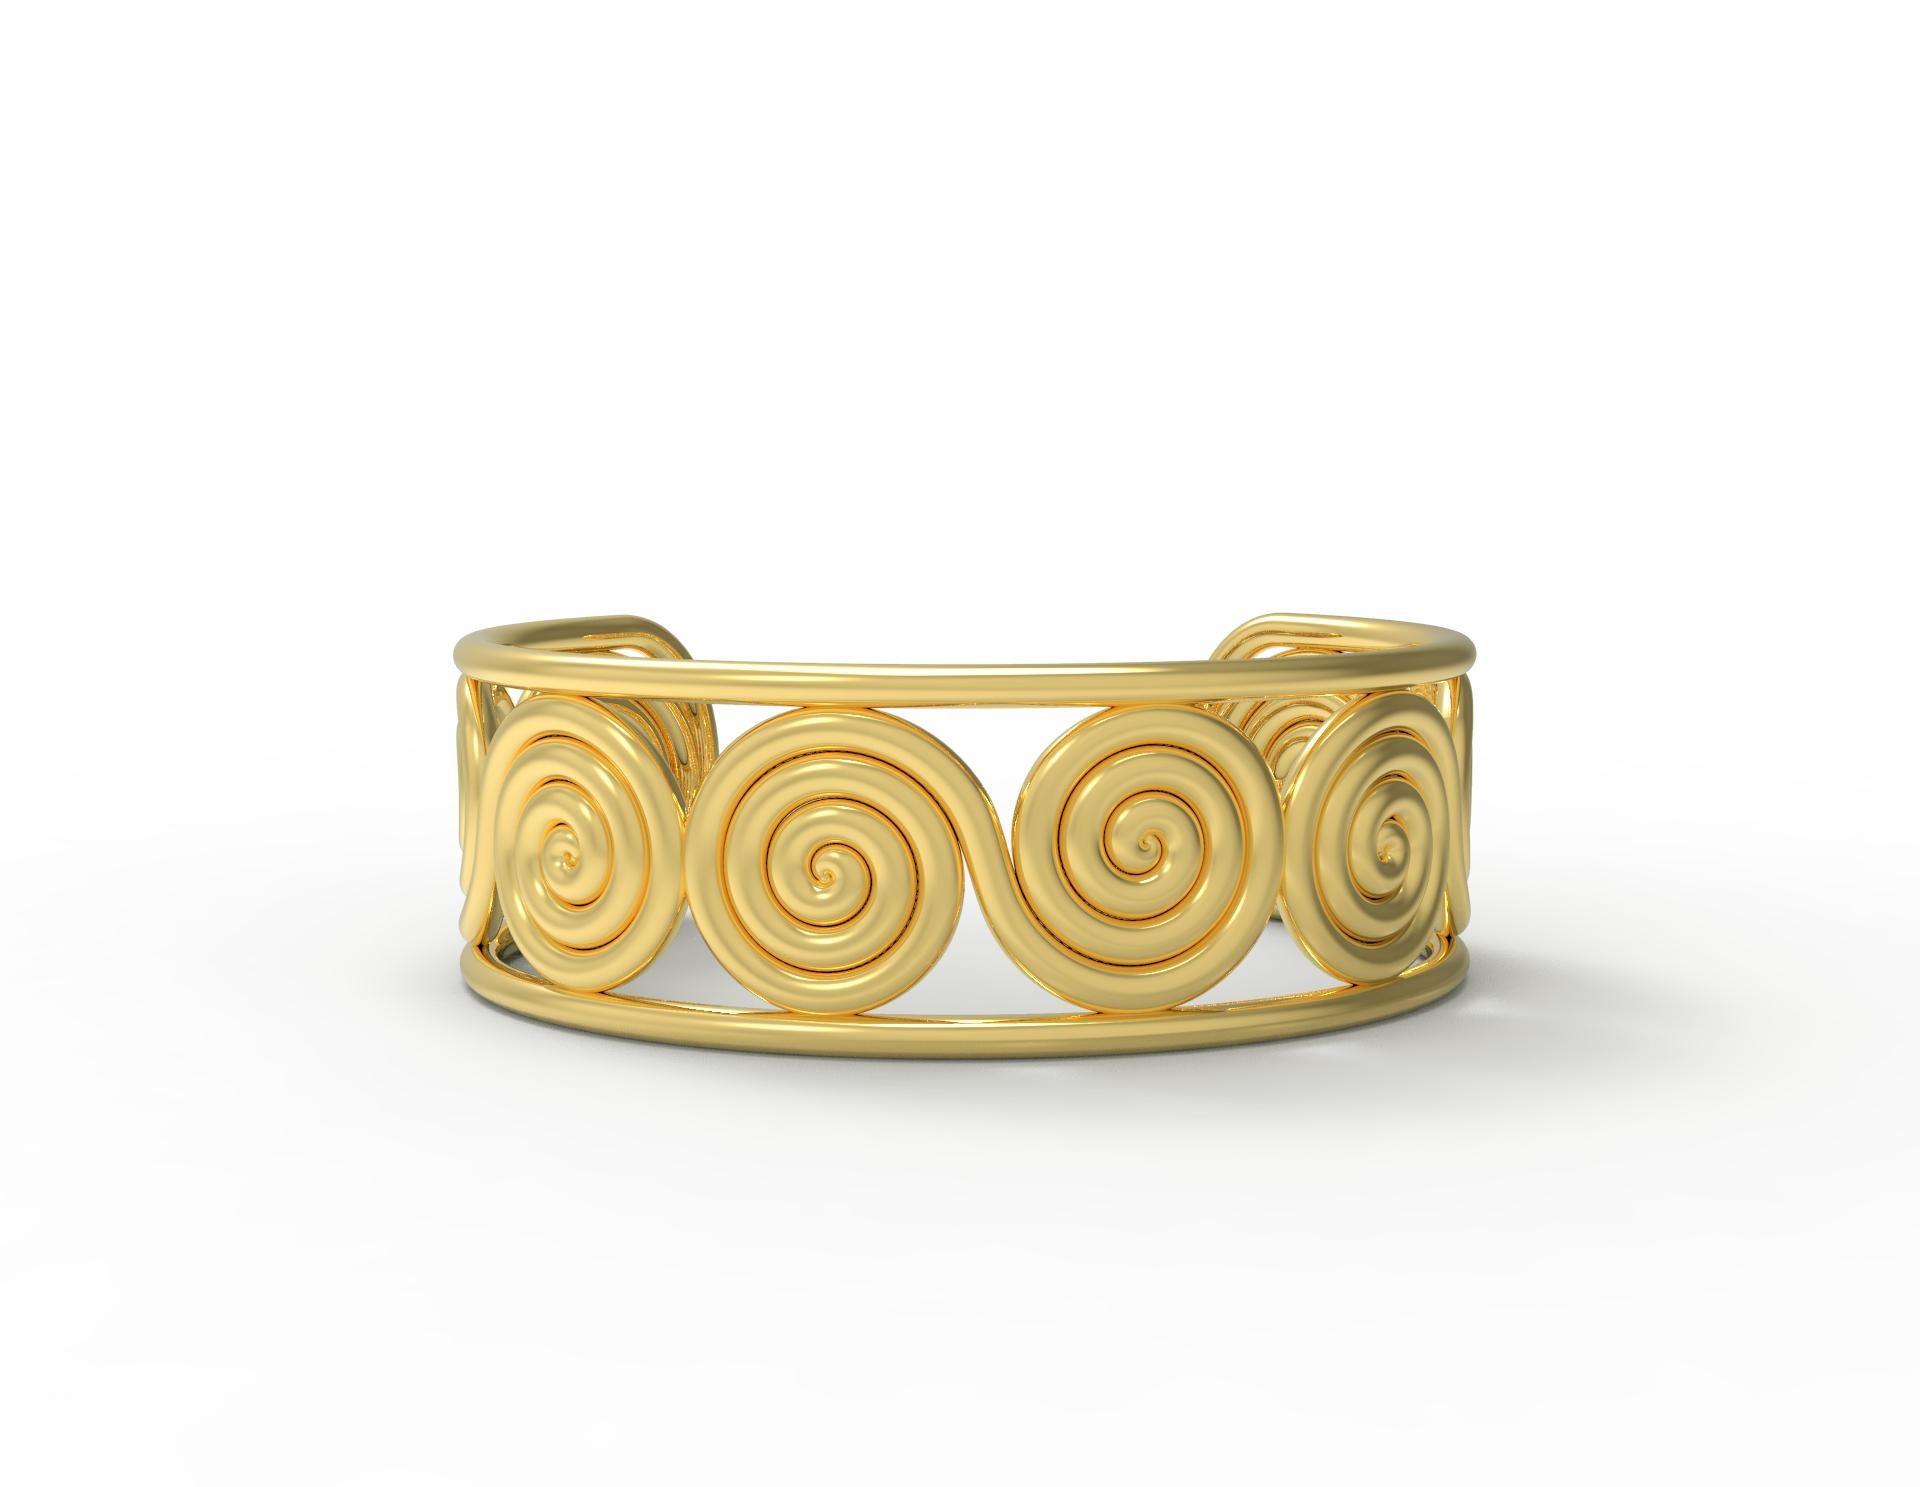 22 Karat Yellow Gold Spiral Cuff Bracelet by ROMAE Jewelry - Inspired by an Ancient Design. Our stunning solid gold 